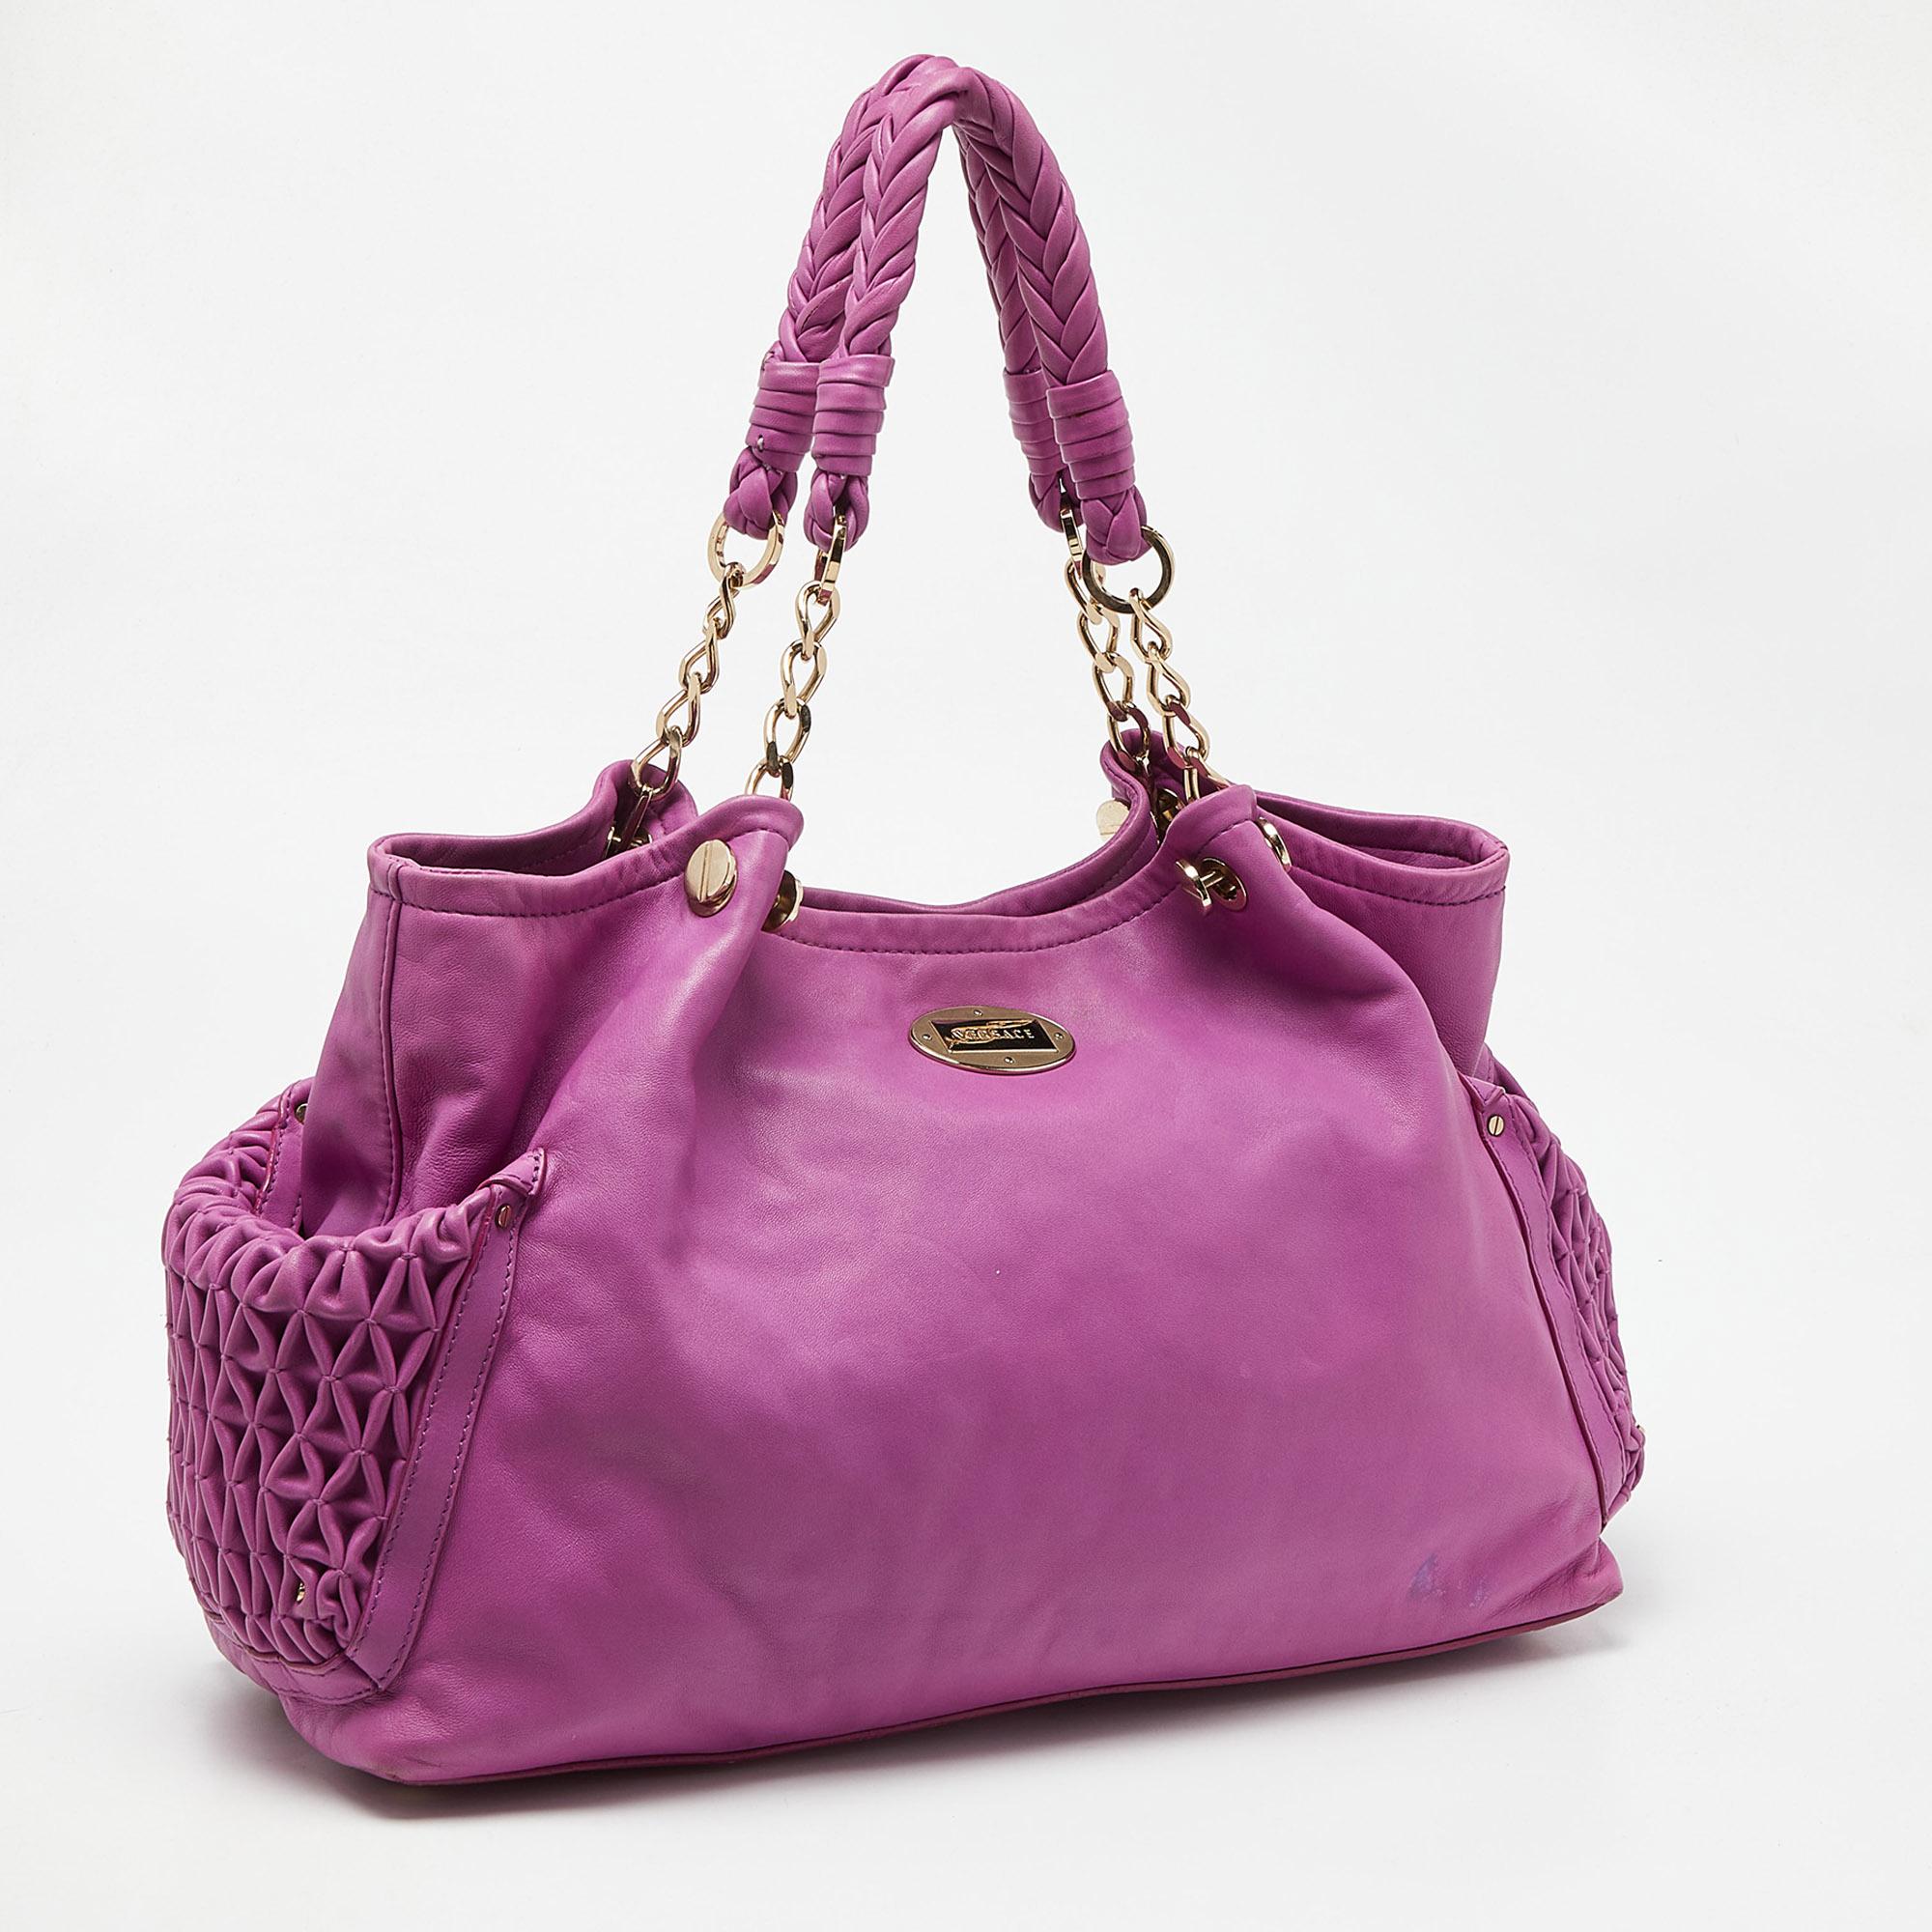 Versace Pink Pleated Leather Chain Satchel In Good Condition For Sale In Dubai, Al Qouz 2